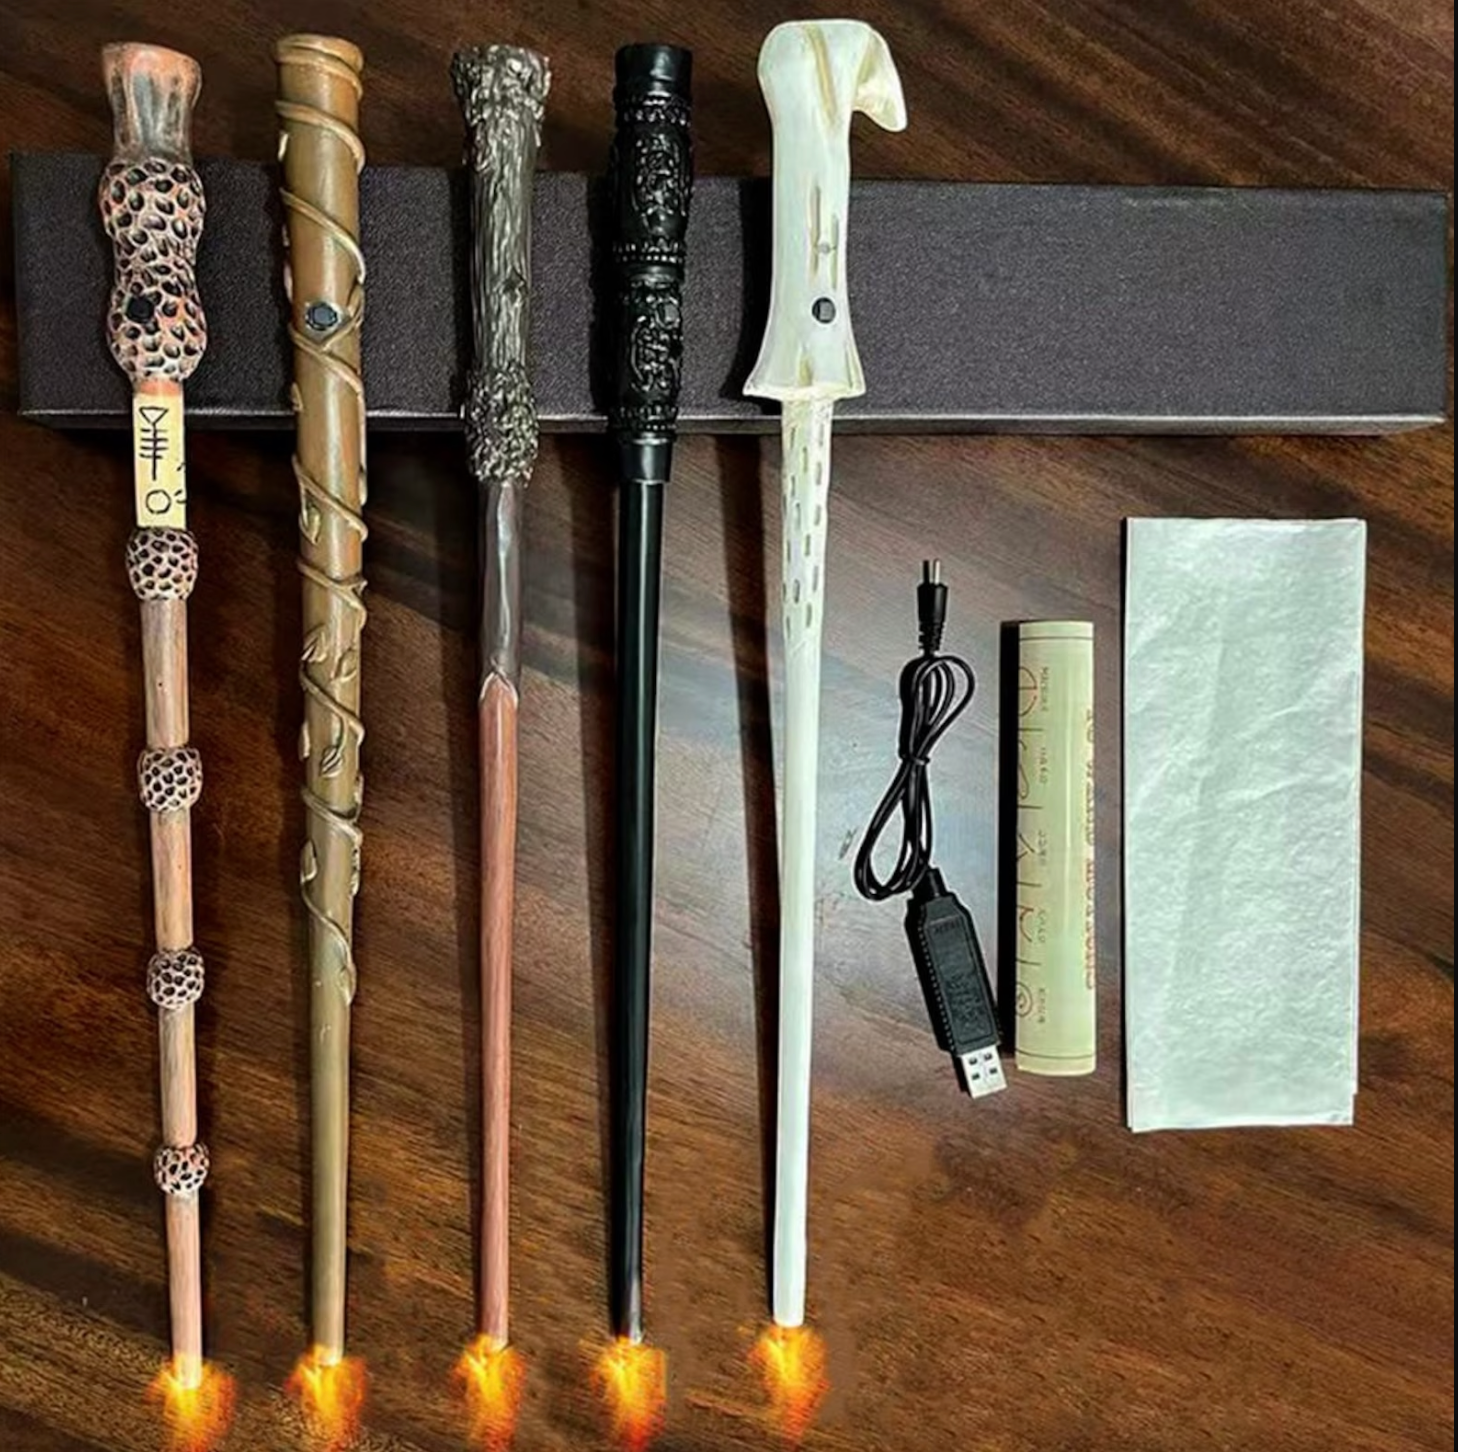 Harry Potter Flaming Wands